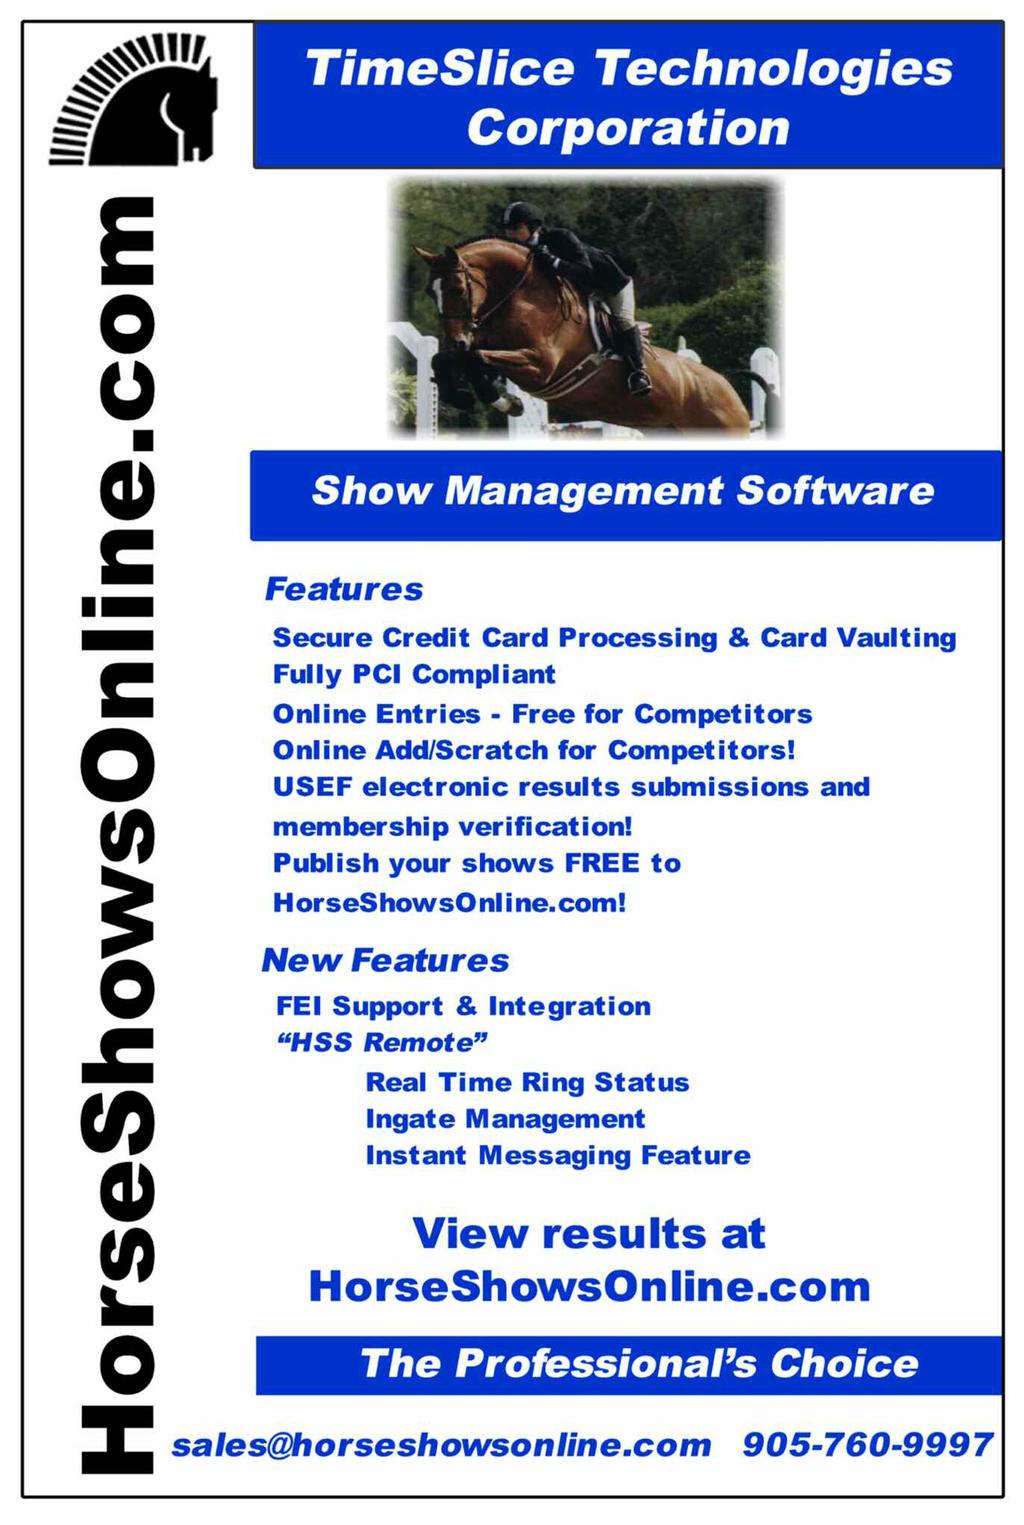 Show Results Posted Daily at horseshowsonline.com Show Results Posted Daily at horseshowsonline.